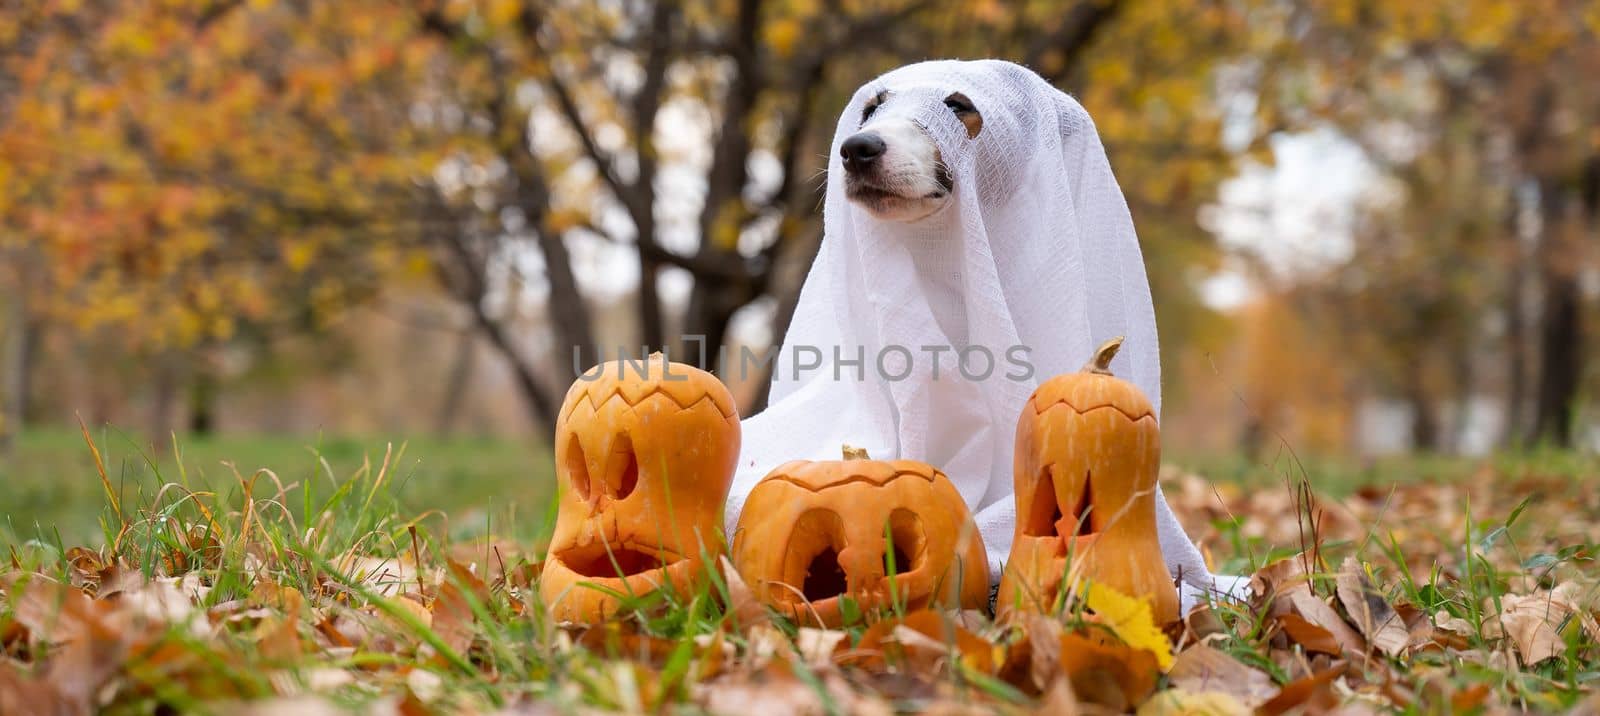 Dog jack russell terrier in a ghost costume with jack-o-lantern pumpkins in the autumn forest. by mrwed54